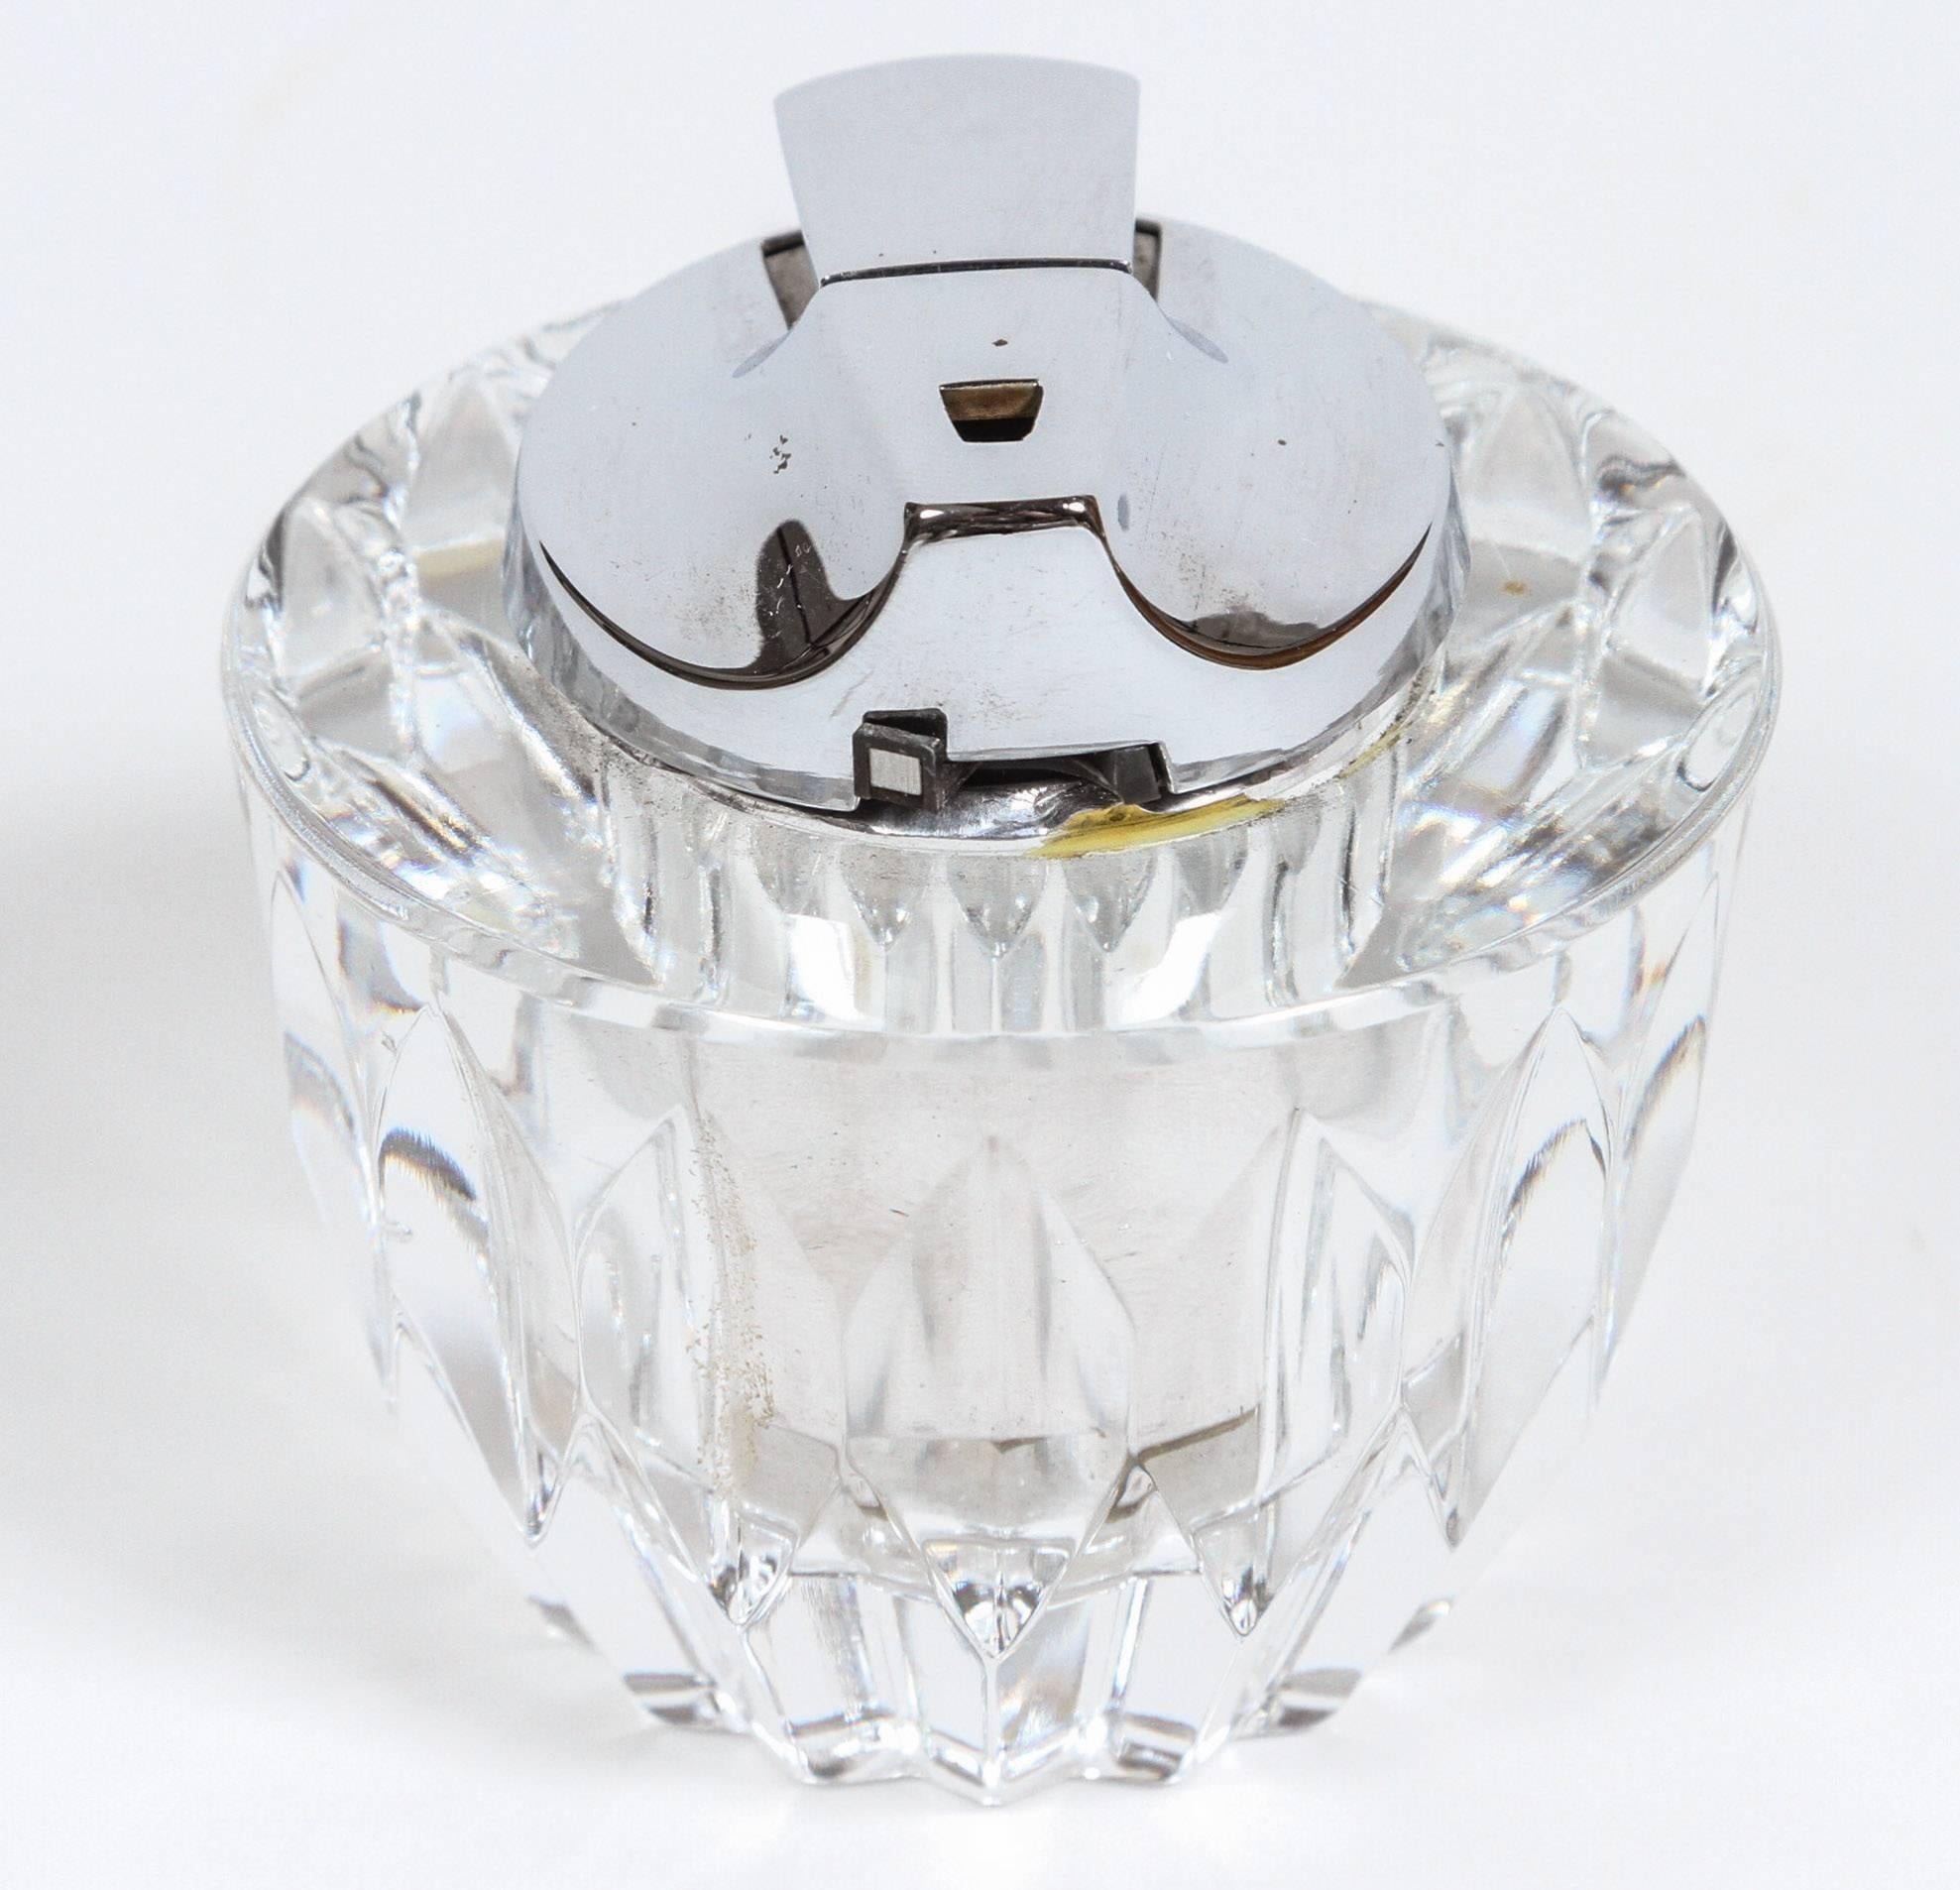 Ronson cut clear crystal table lighter.
Made in France.
Makers mark underneath.
Does not work just use as a decorative object.